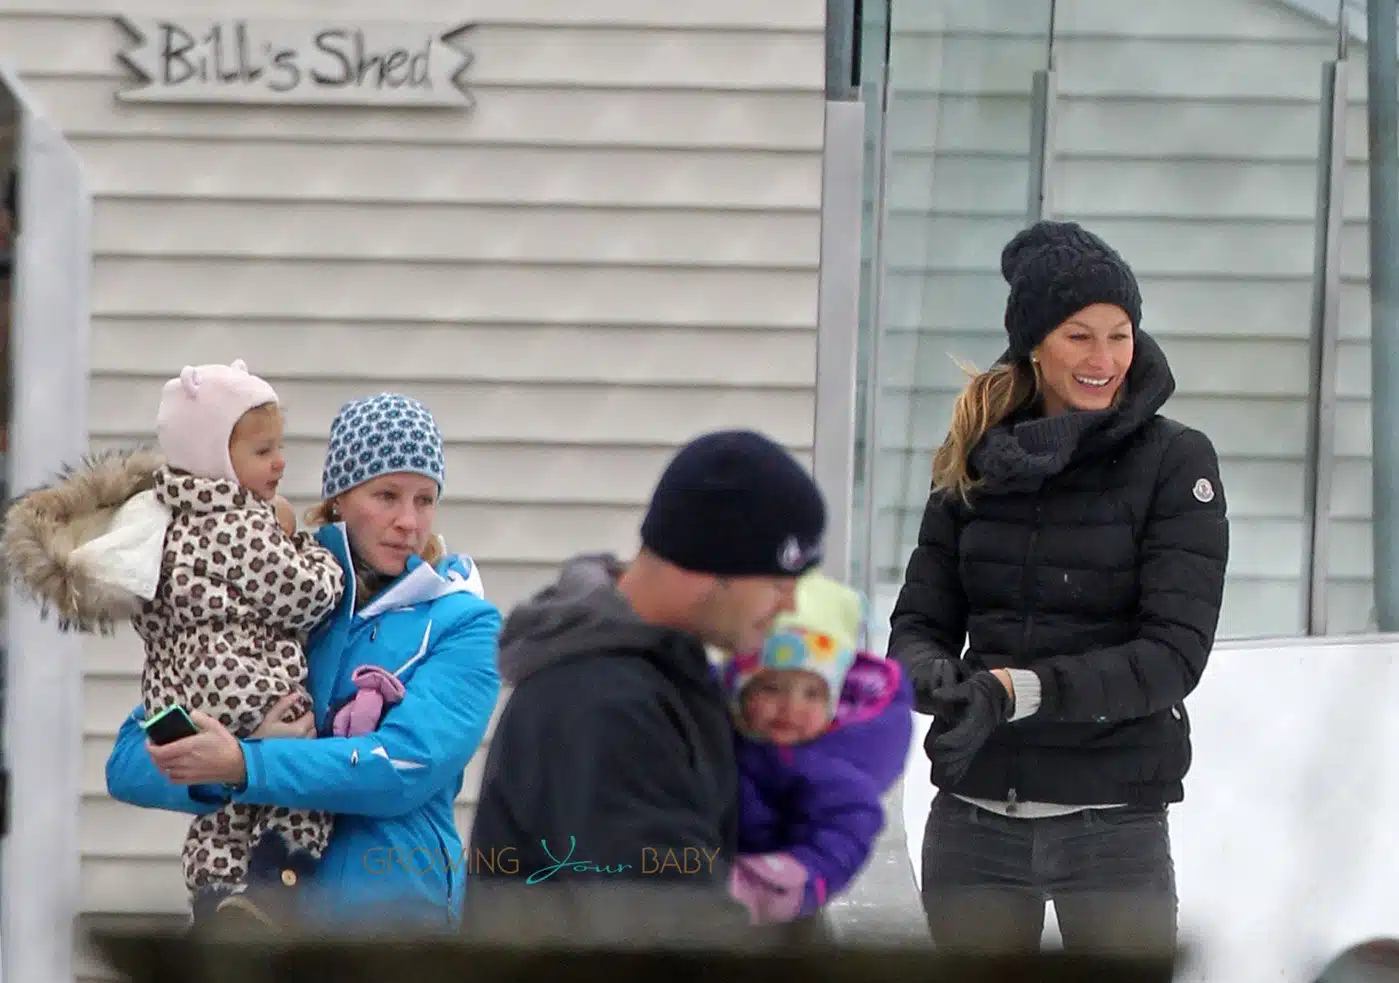 Gisele Bundchen takes her daughter Vivian for ice skating lessons on a cold morning in Boston